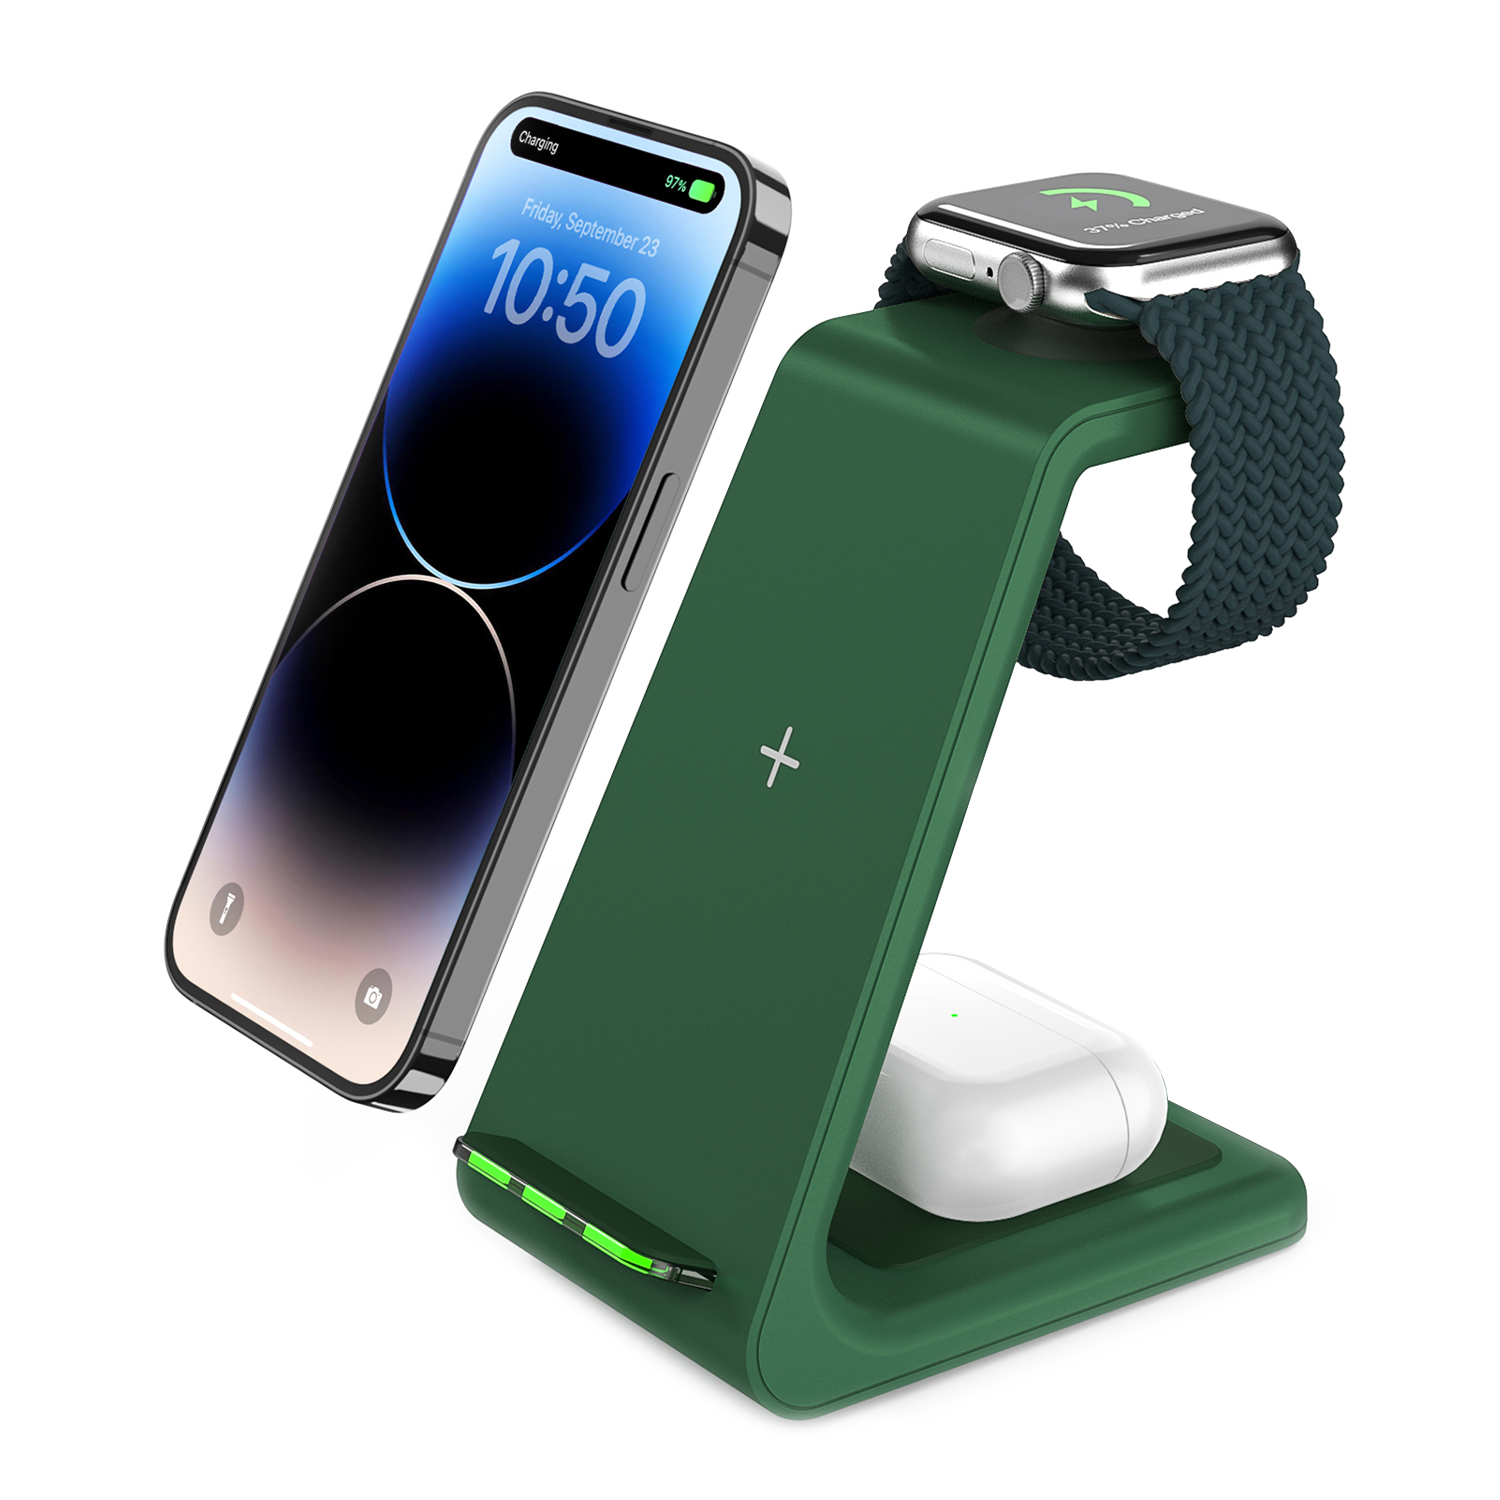 GEEKERA Wireless Charging Stand, 3 in 1 Wireless Charger Dock Station for Apple Devices